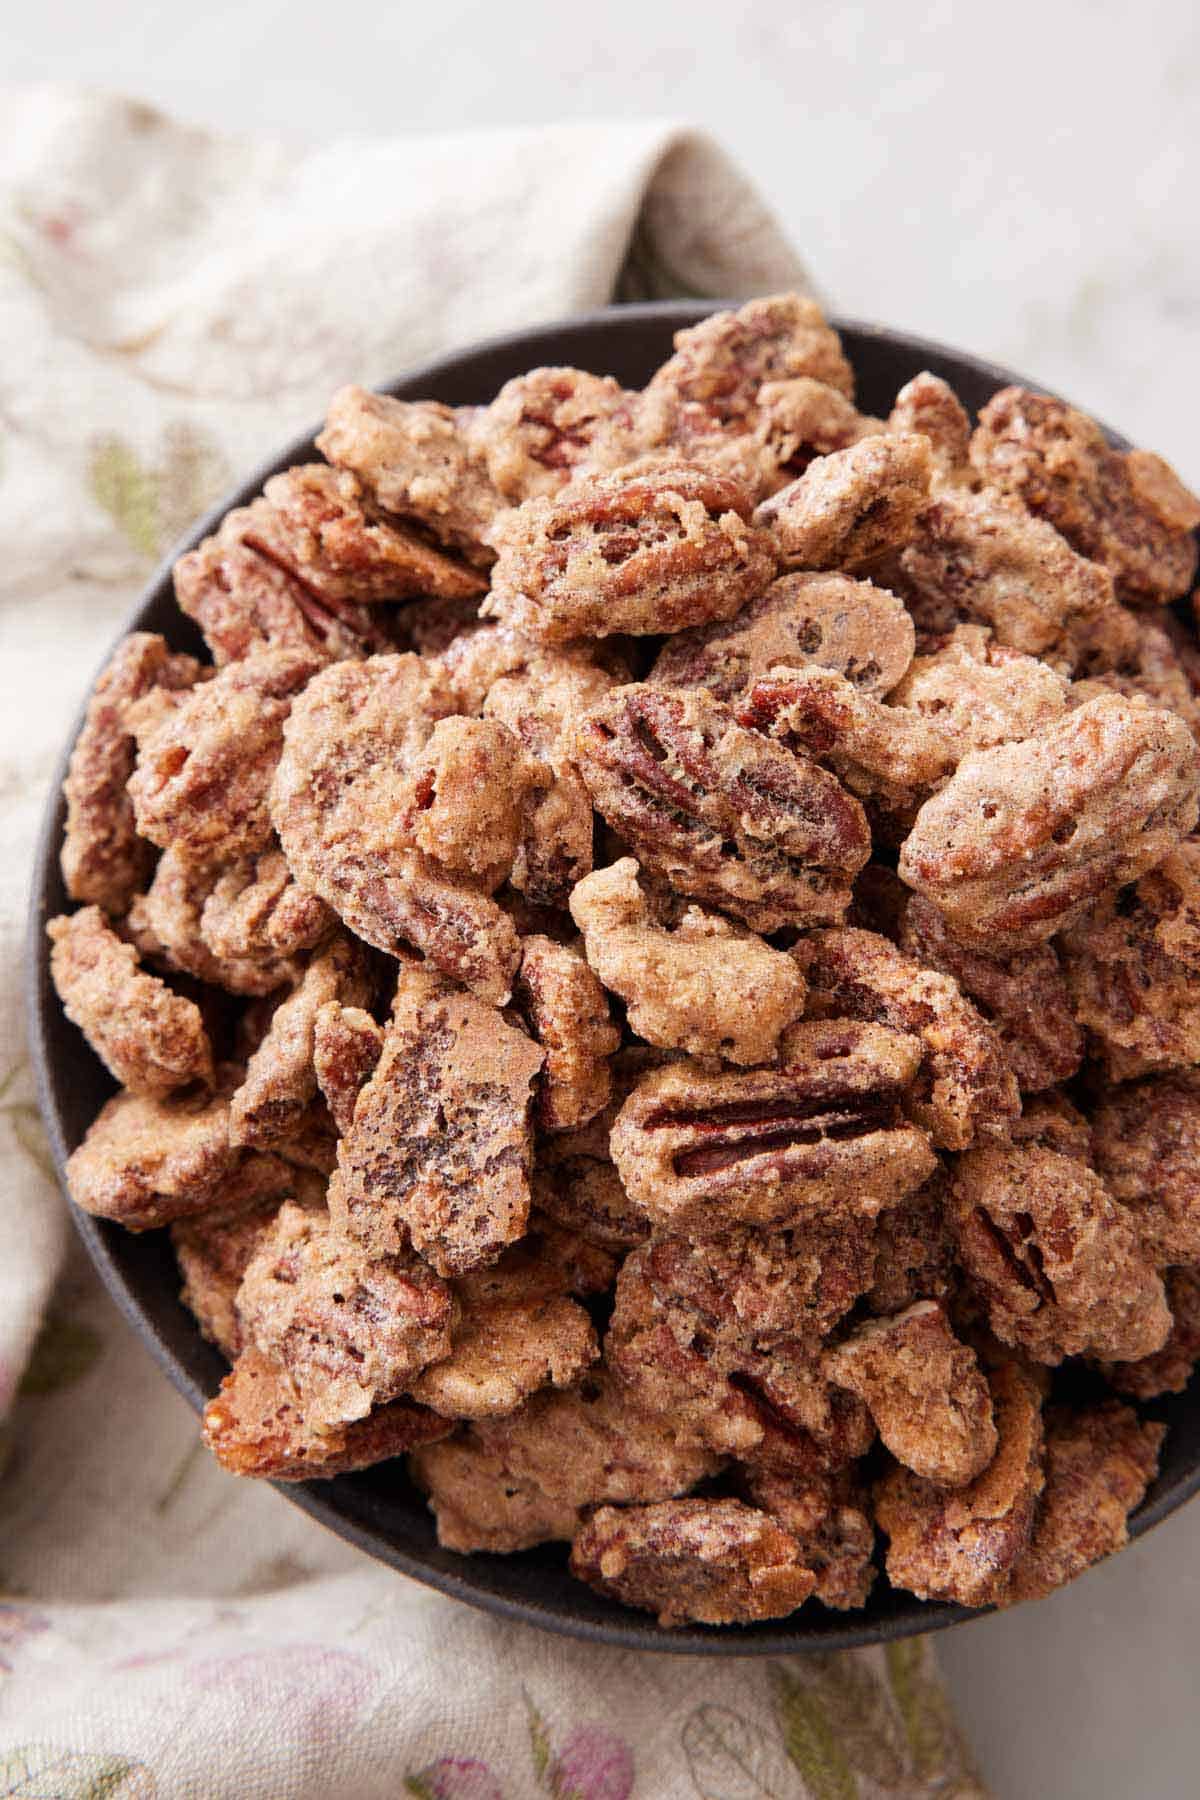 Overhead view of a bowl of candied pecans.